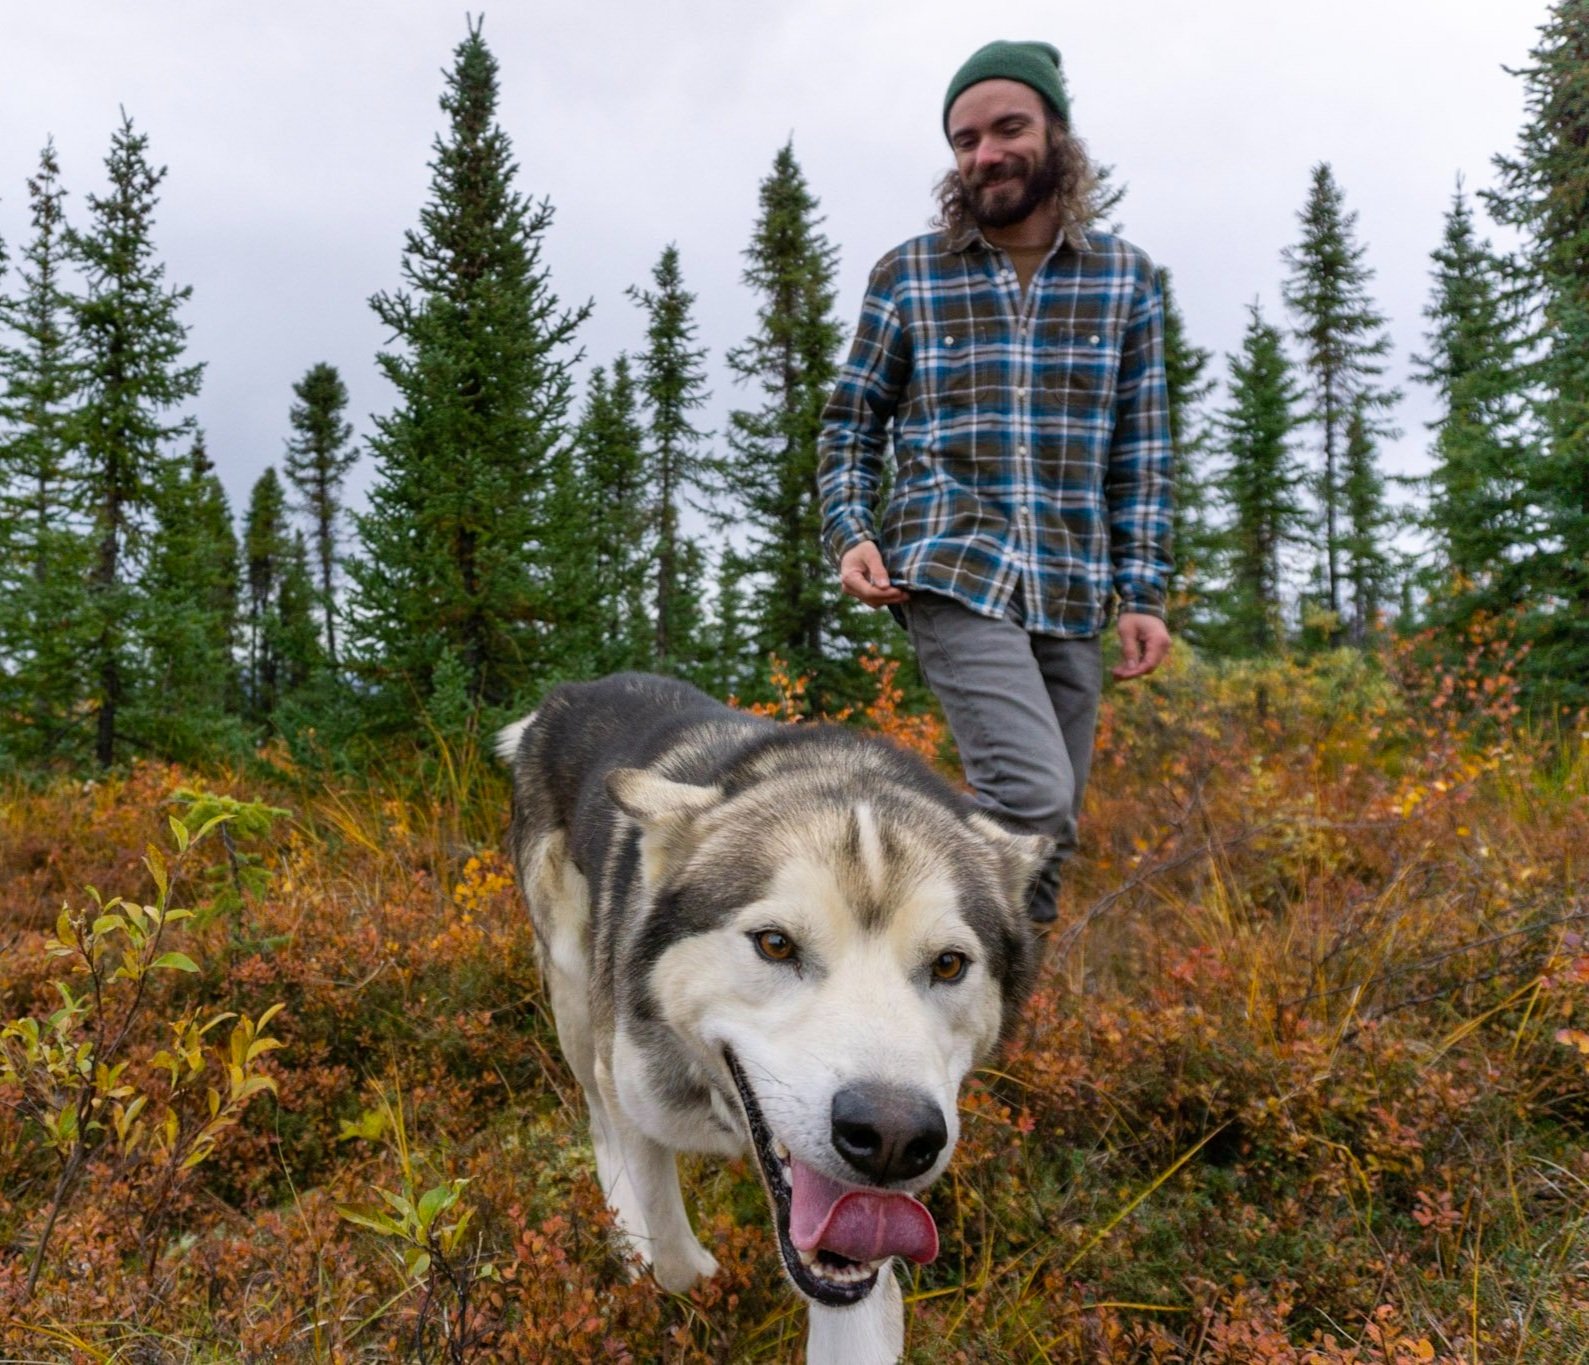 An alaskan husky and male guide wearing a plaid shirt walk together through the tundra